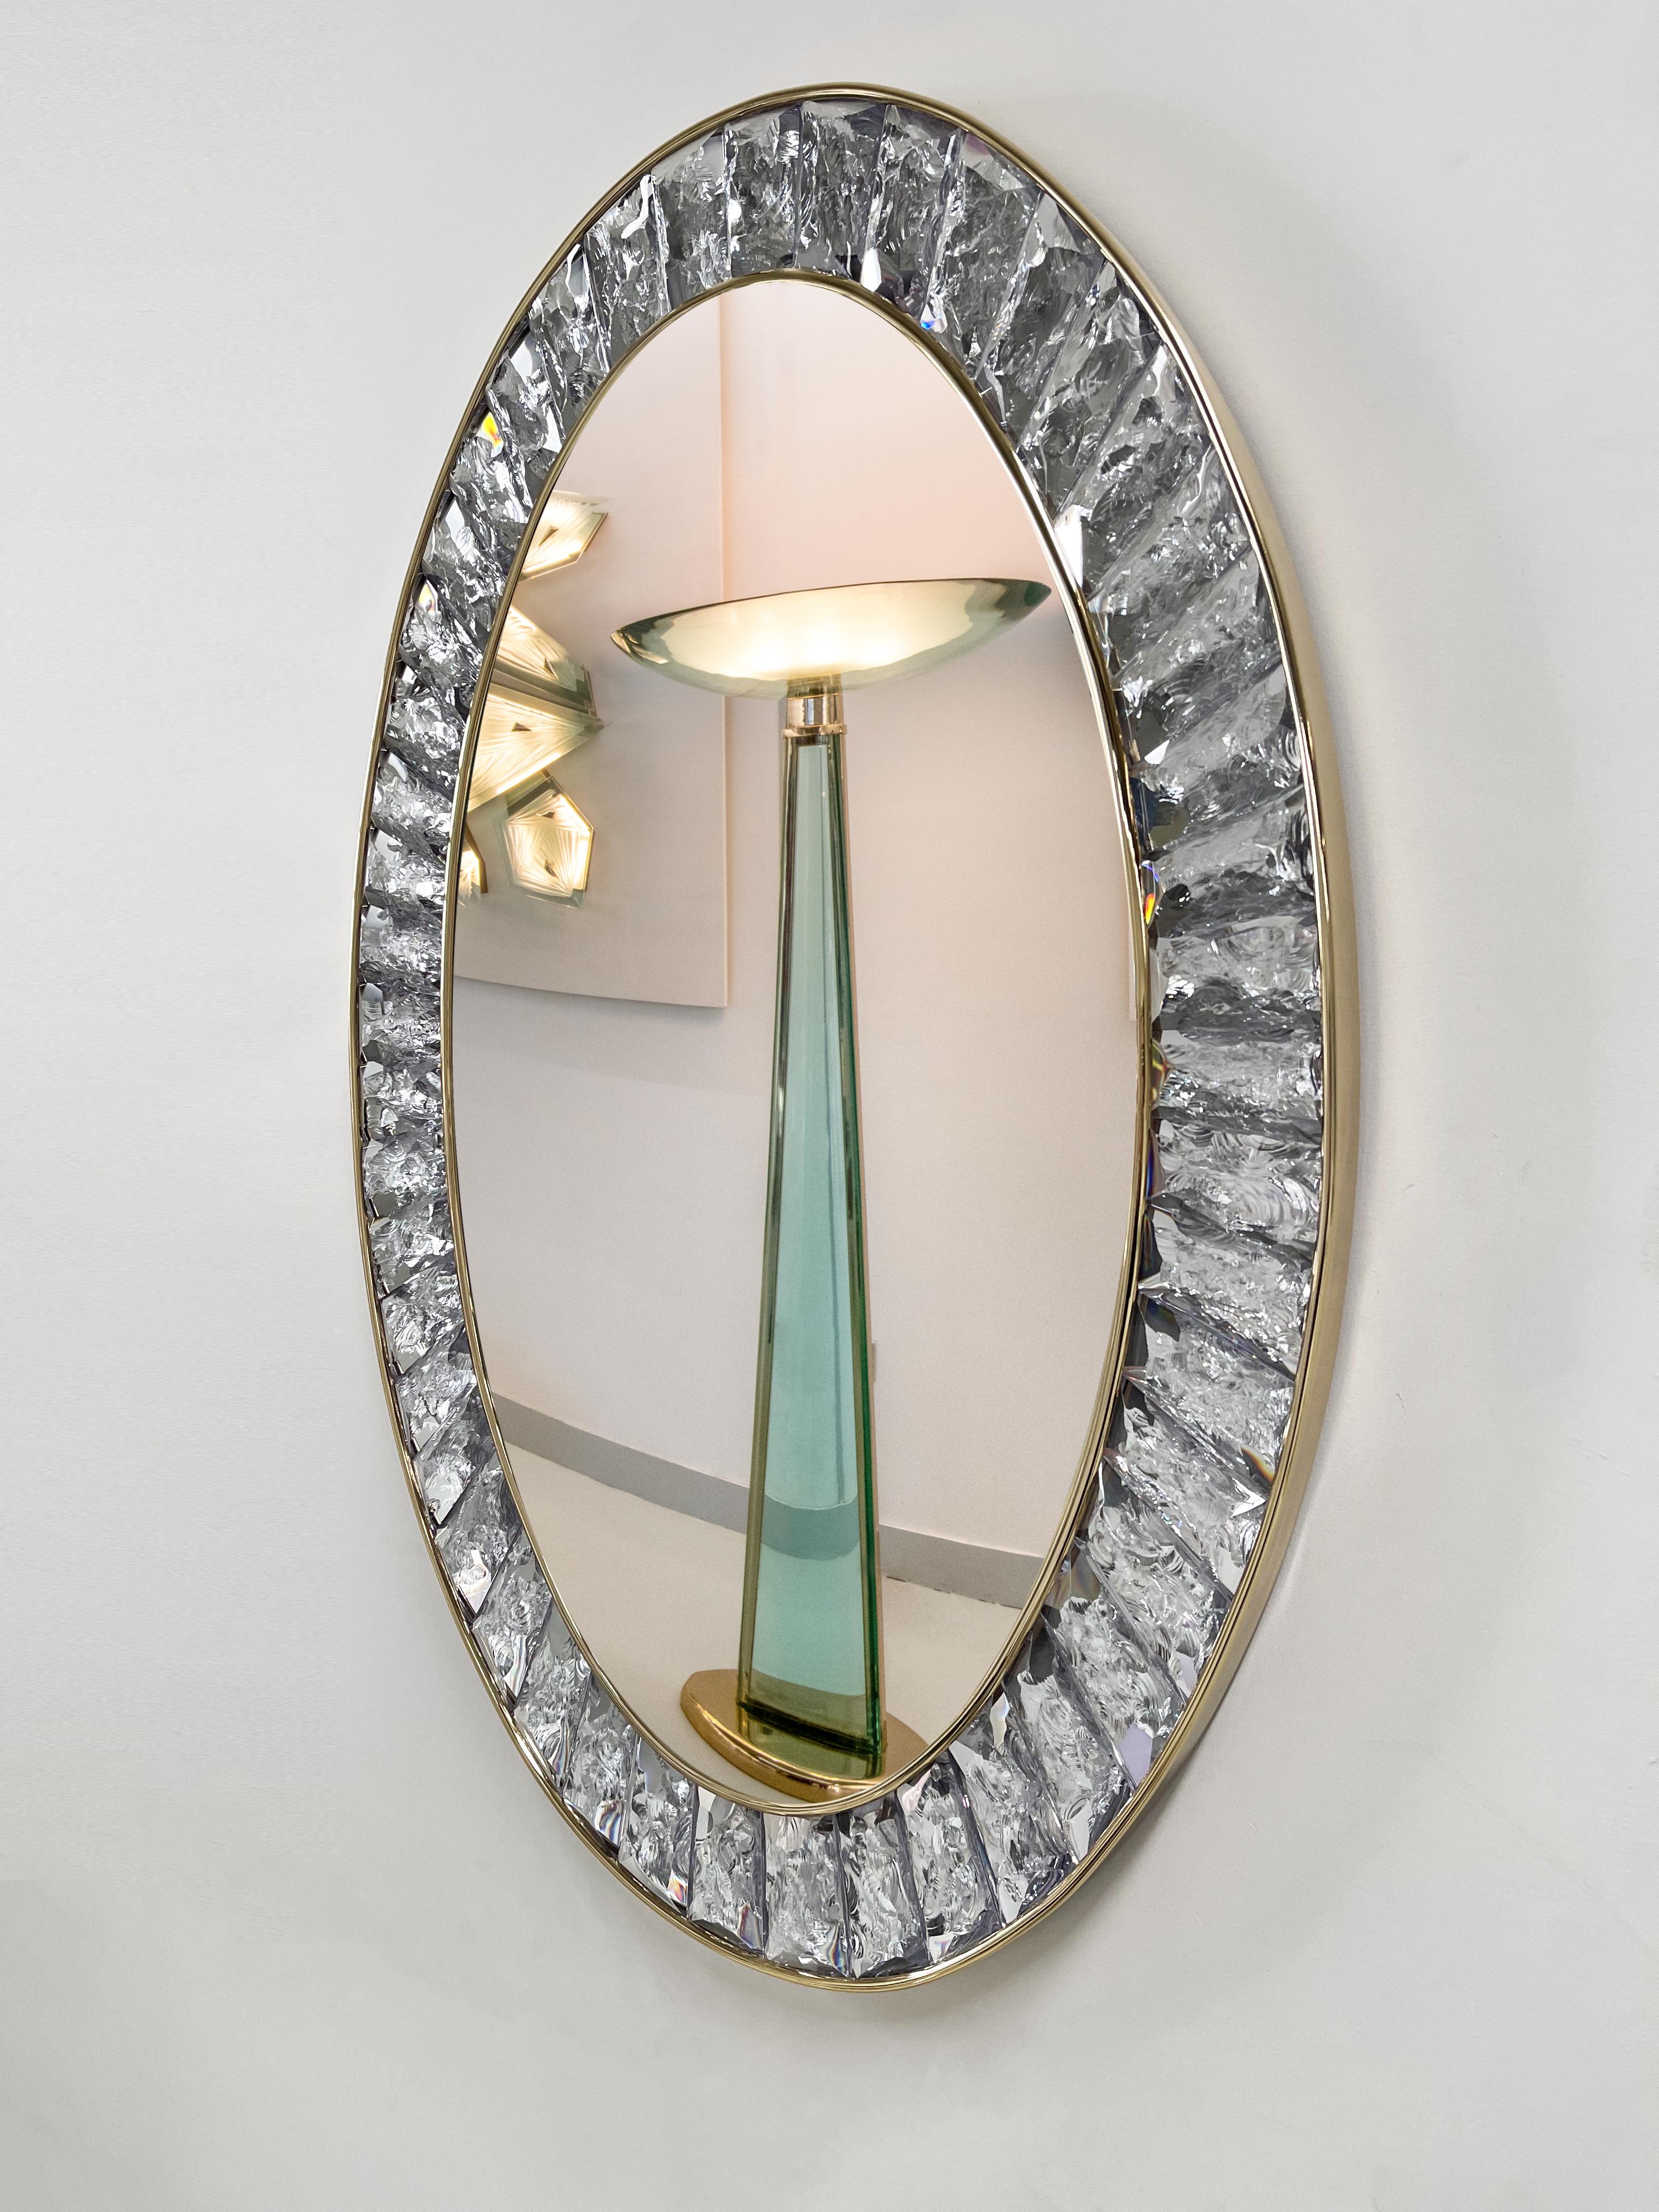 Contemporary Martelè Mirror Handmade Crystal, Brass and 24ktGold by Ghirò Studio For Sale 1